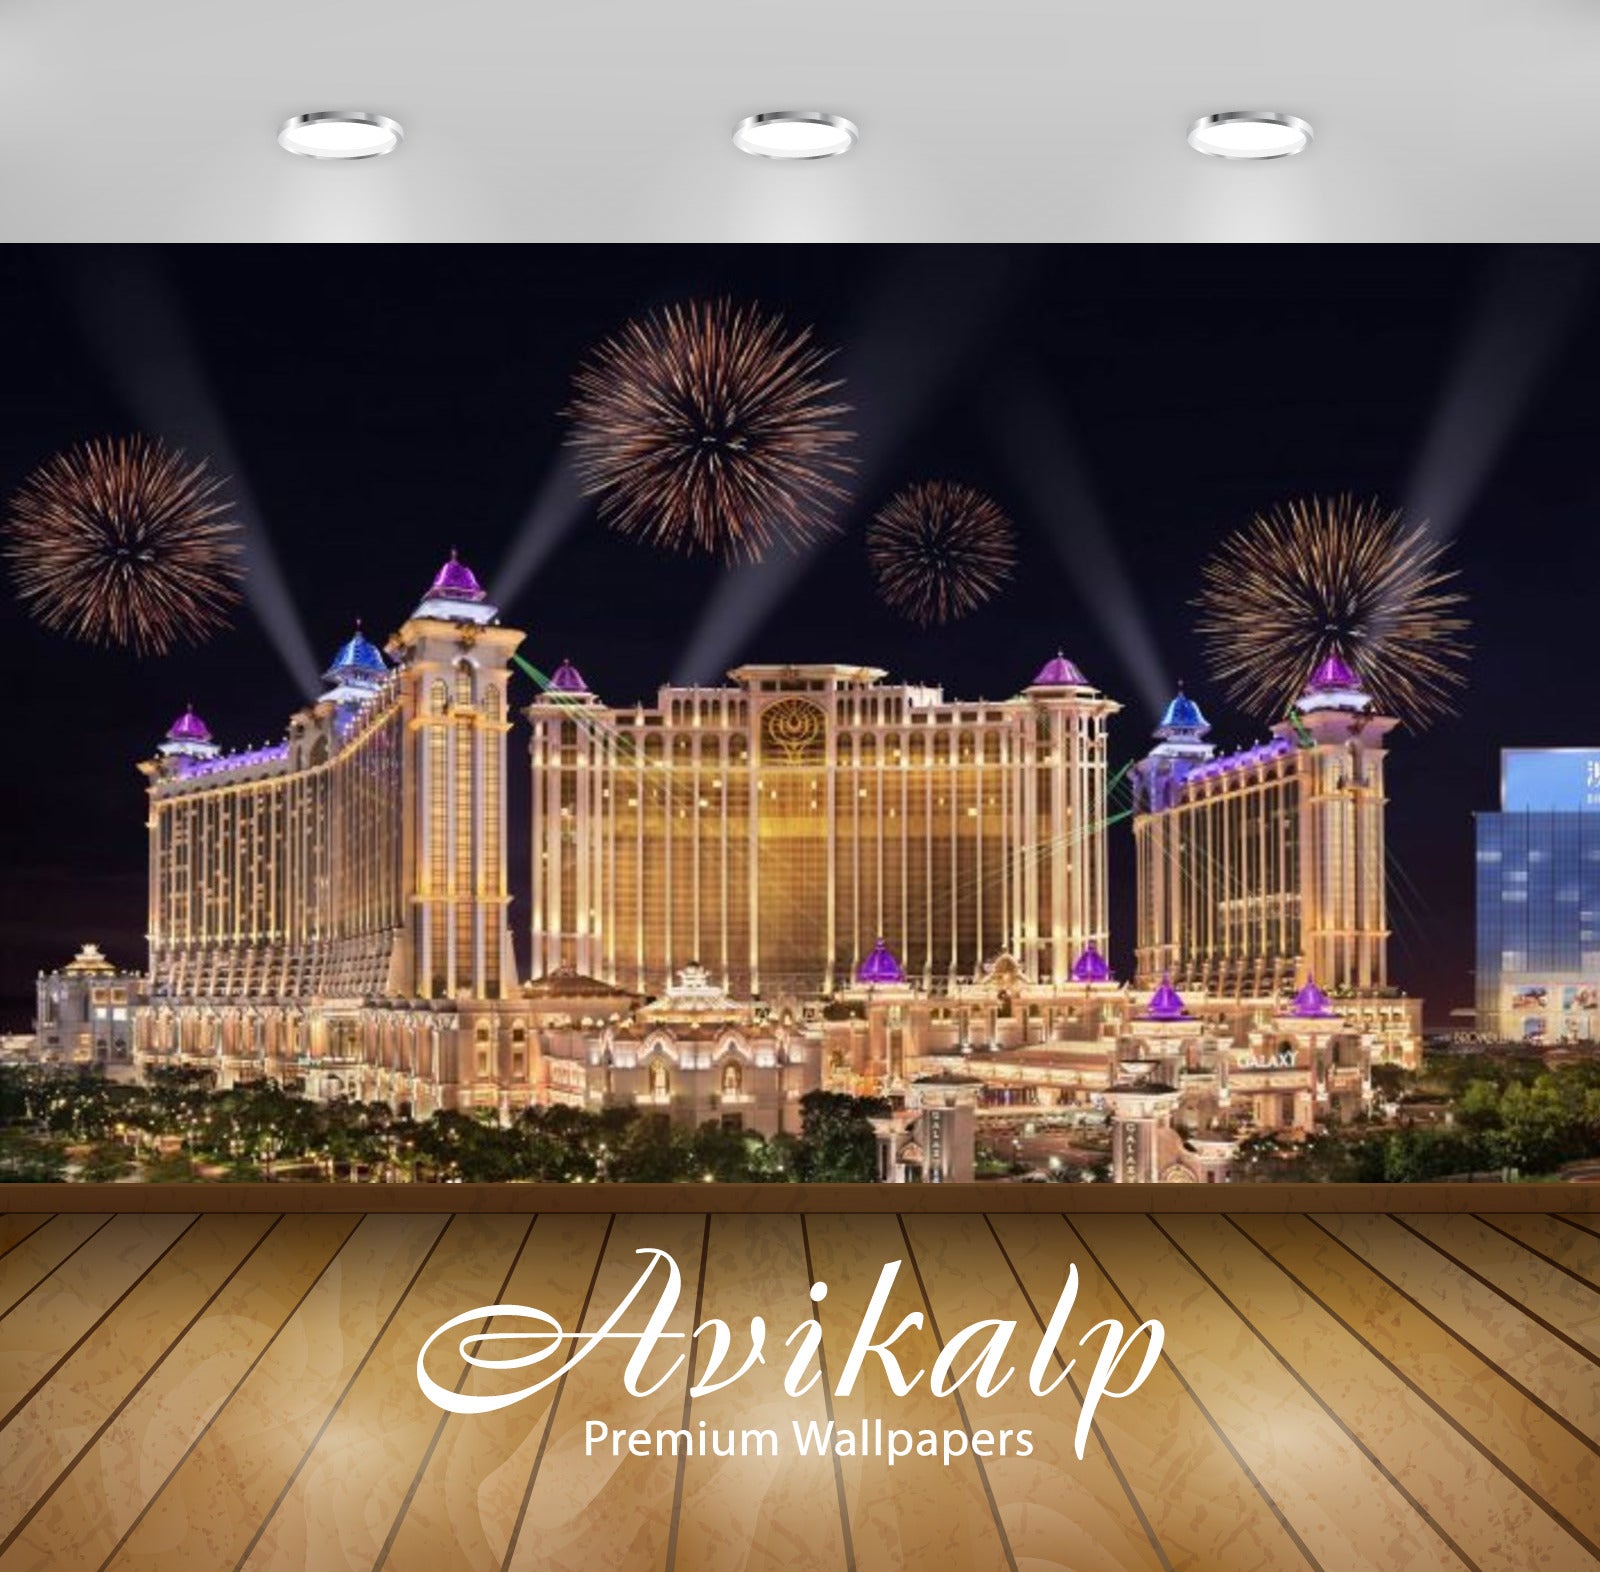 Avikalp Exclusive Awi2650 Galaxy Hotel Macau Cotai Fireworks In The Night Full HD Wallpapers for Liv